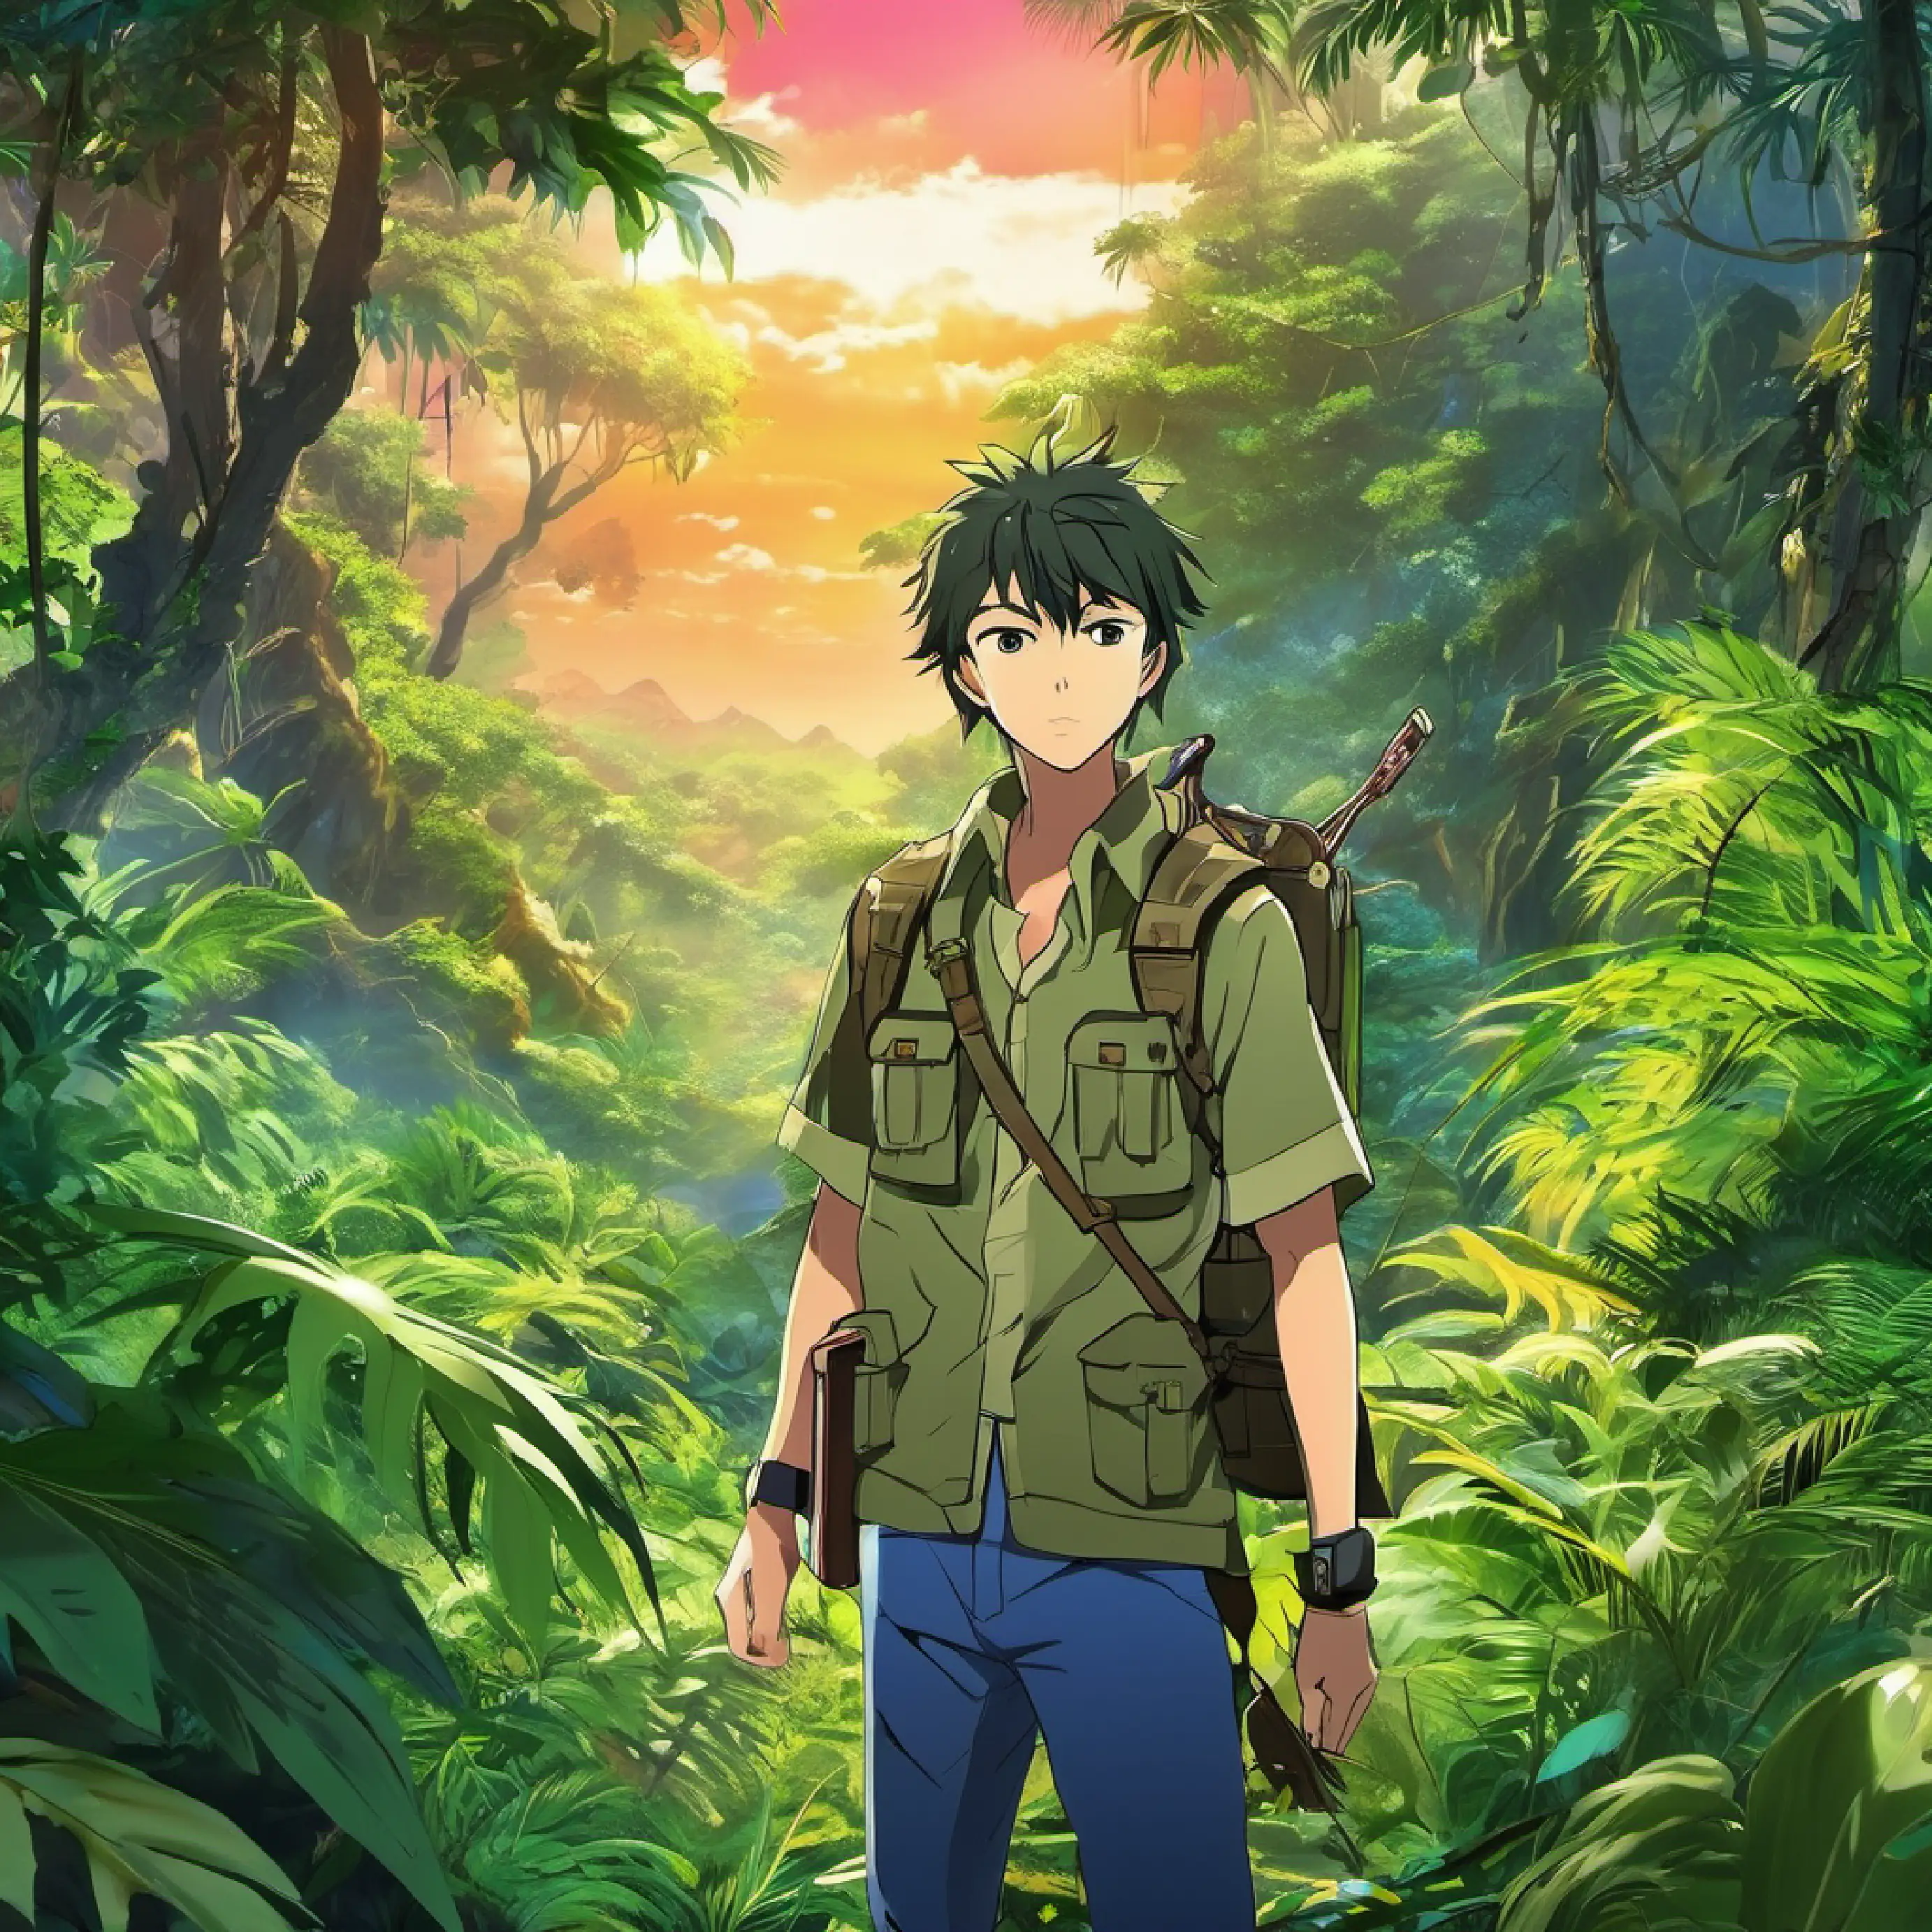 End of war, but Hiroo unaware, hides in the jungle.